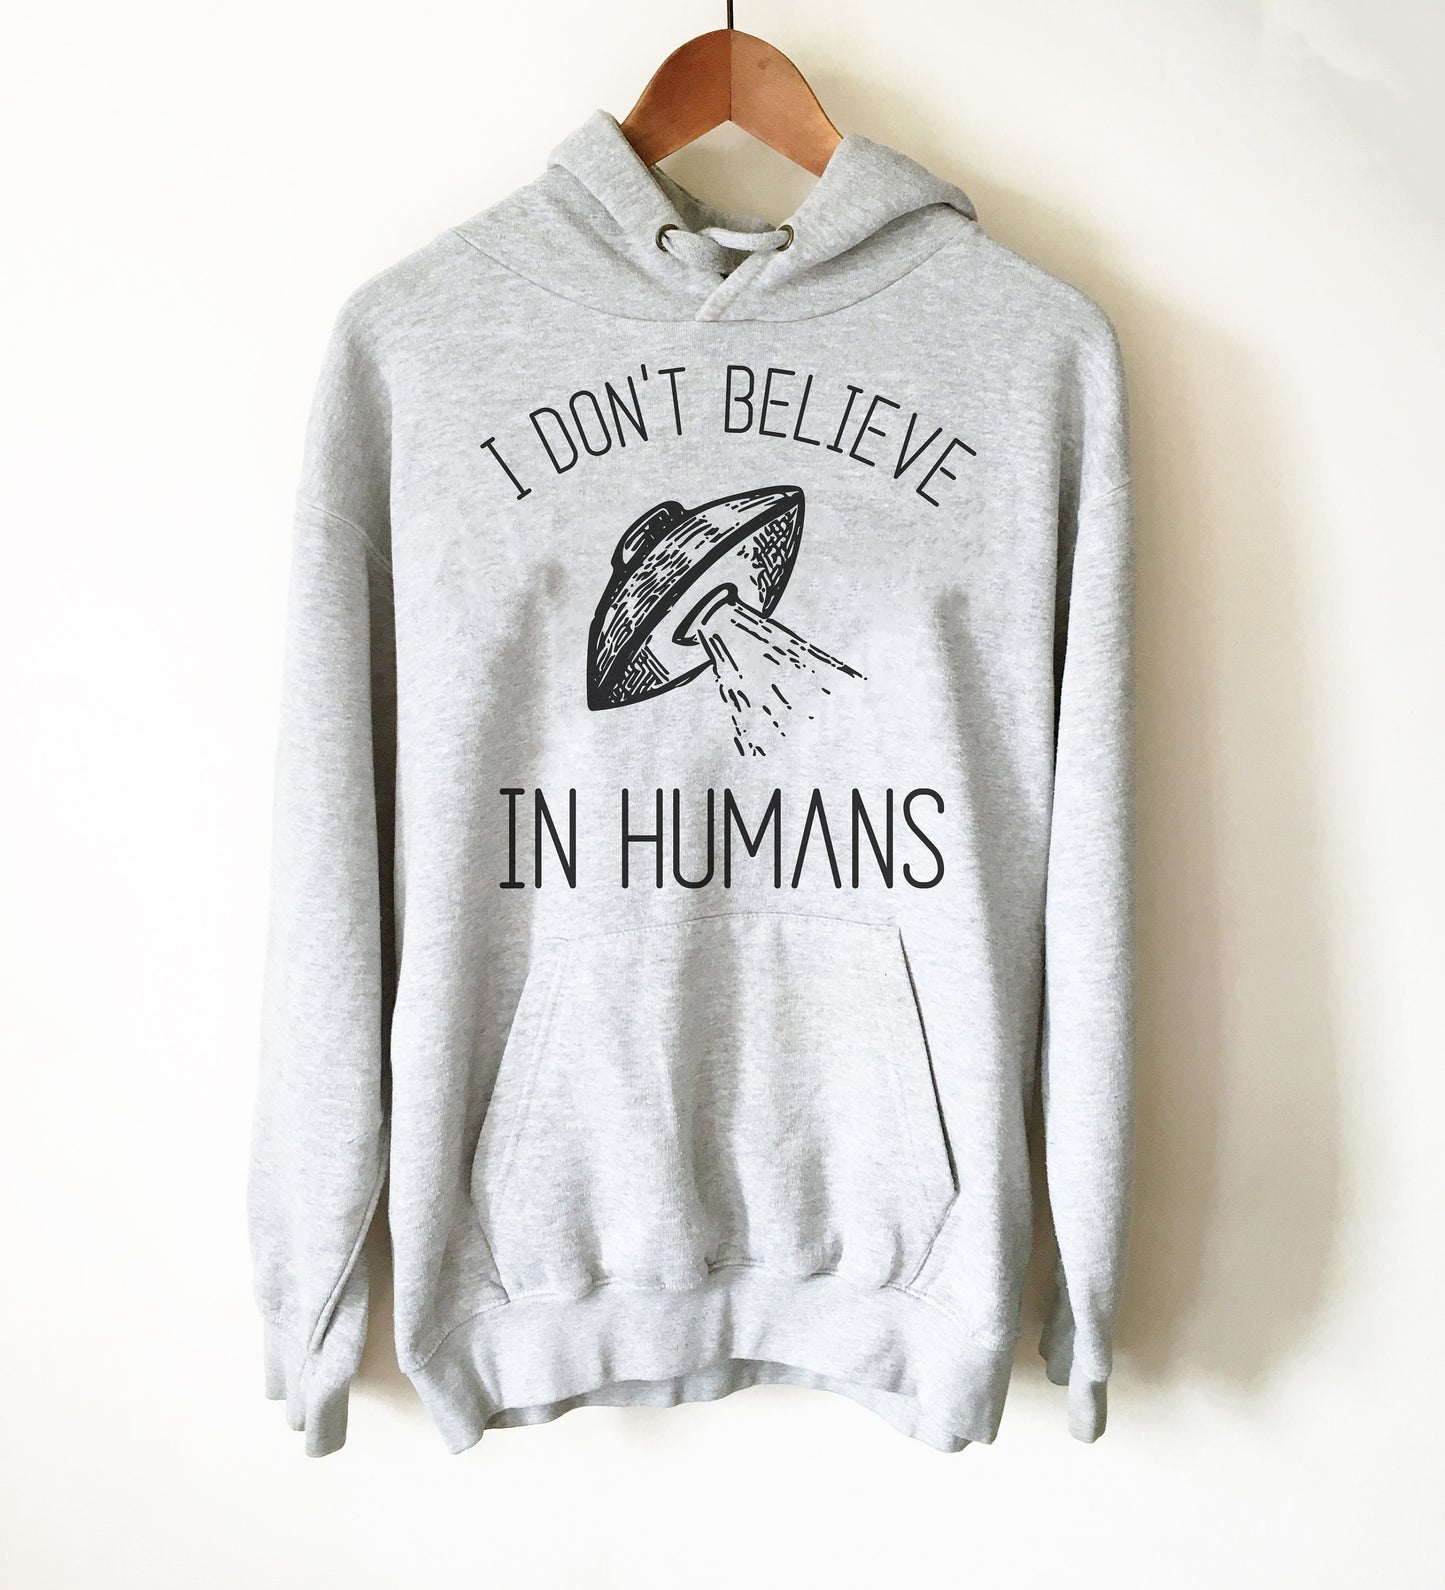 I Don't Believe In Humans Hoodie - Alien Shirt, Alien Gift, Space Shirt, Space Gift, UFO Shirt, Alien T Shirt, Outer Space, UFO Gift